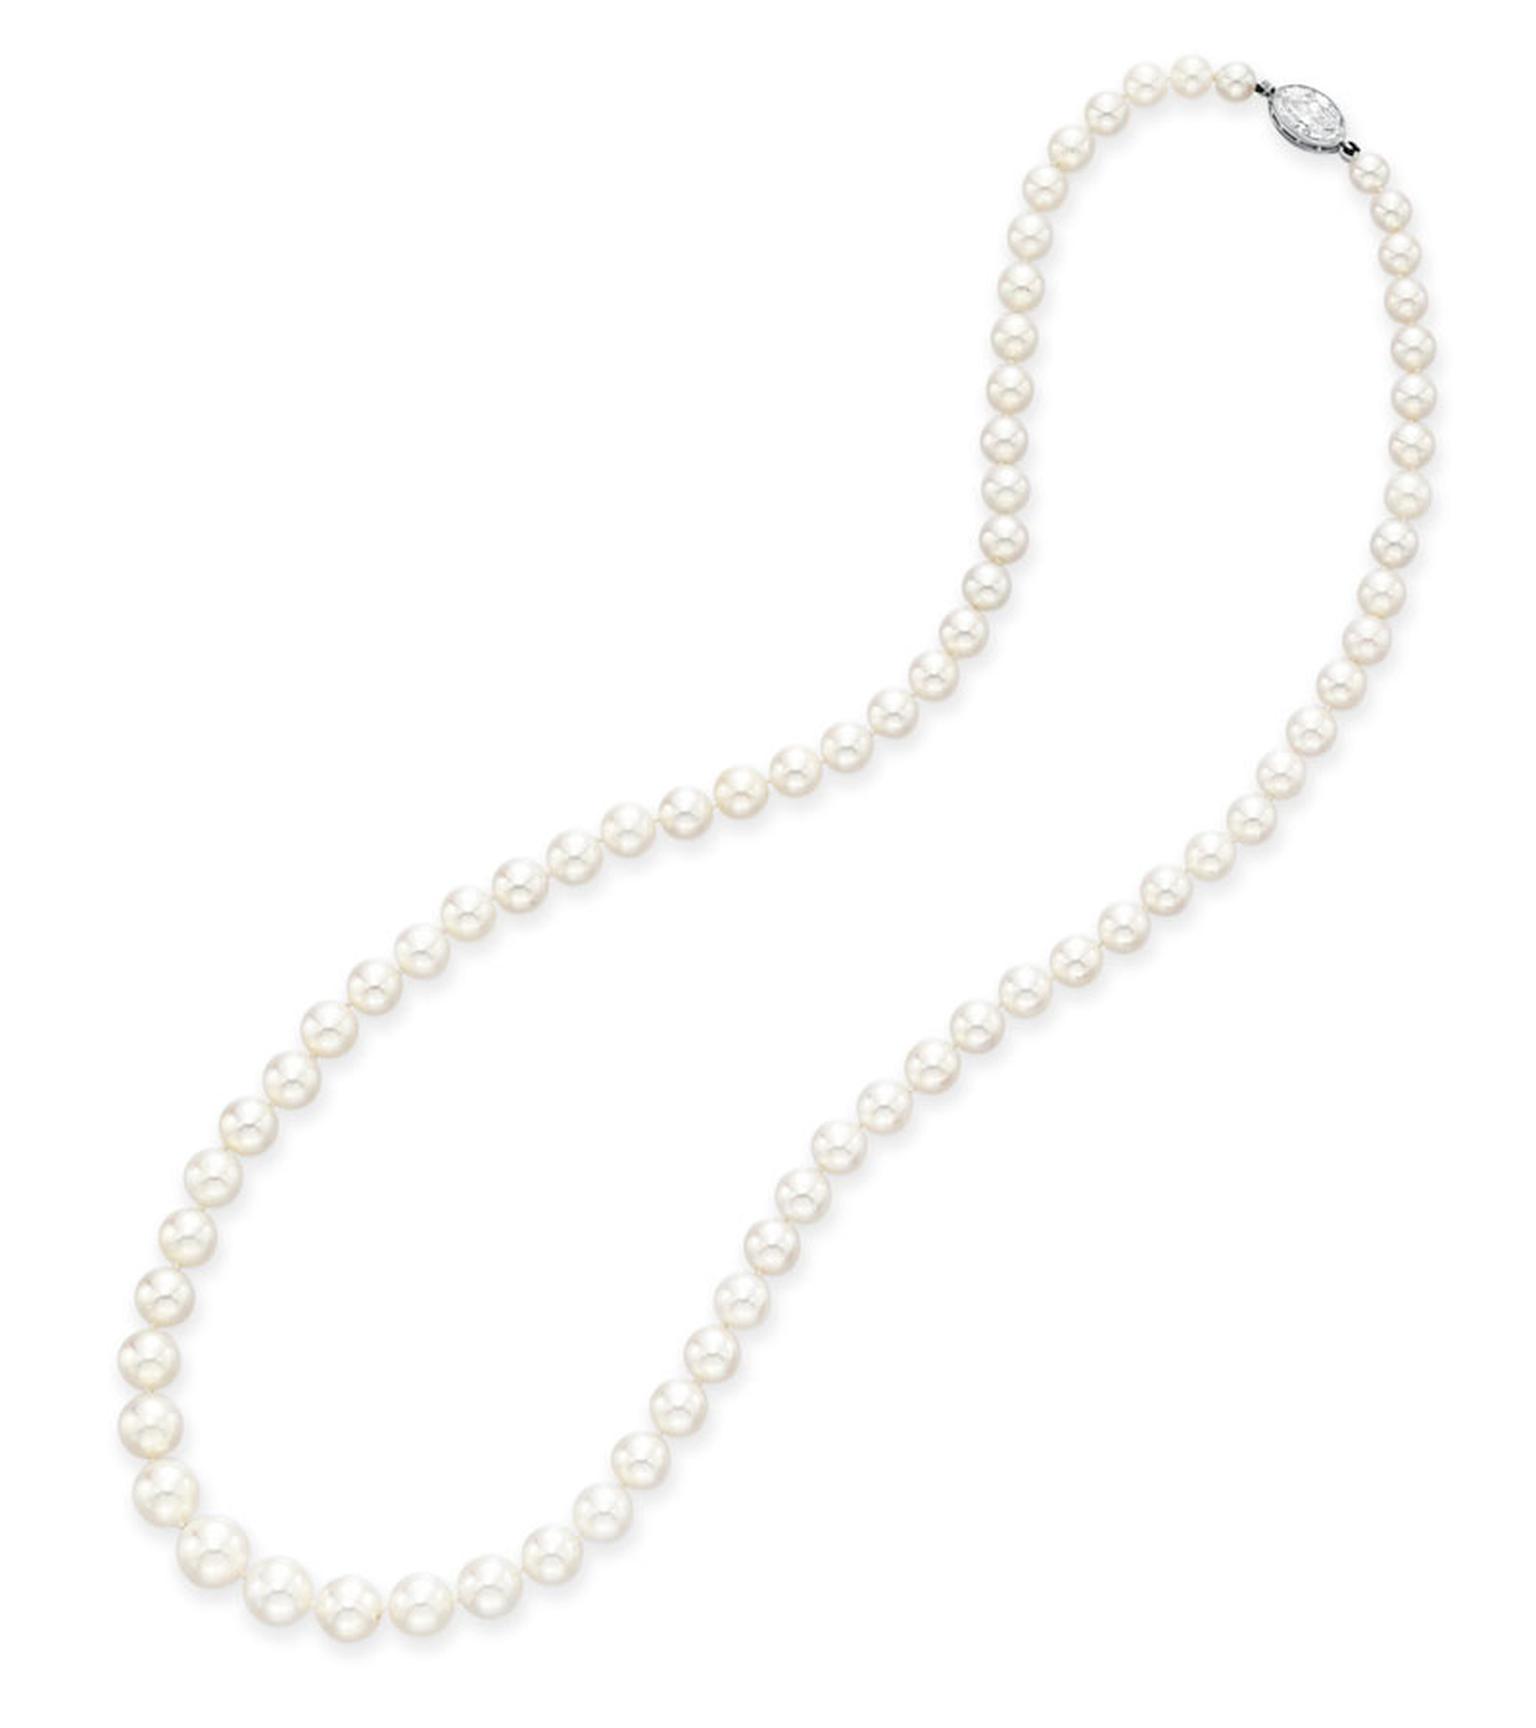 Christies lot302 FROM THE ESTATE OF HUGUETTE M. CLARK A SINGLE-STRAND NATURAL PEARL AND DIAMOND NECKLACE, BY TIFFANY & CO.